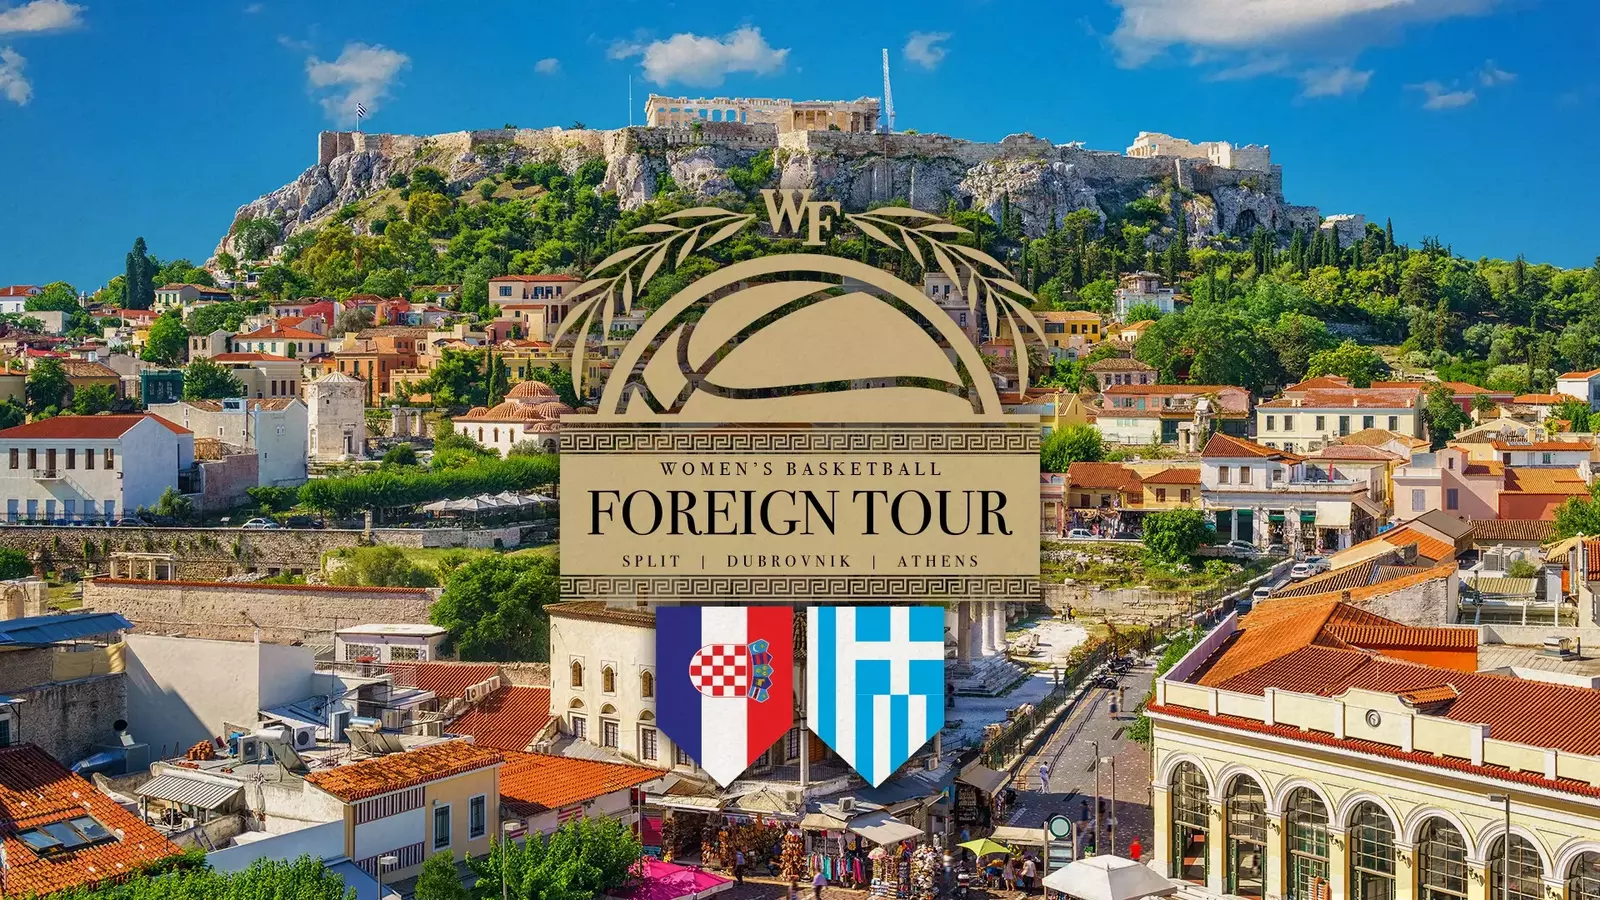 Demon Deacons Announce Overseas Trip to Europe – Wake Forest University Athletics